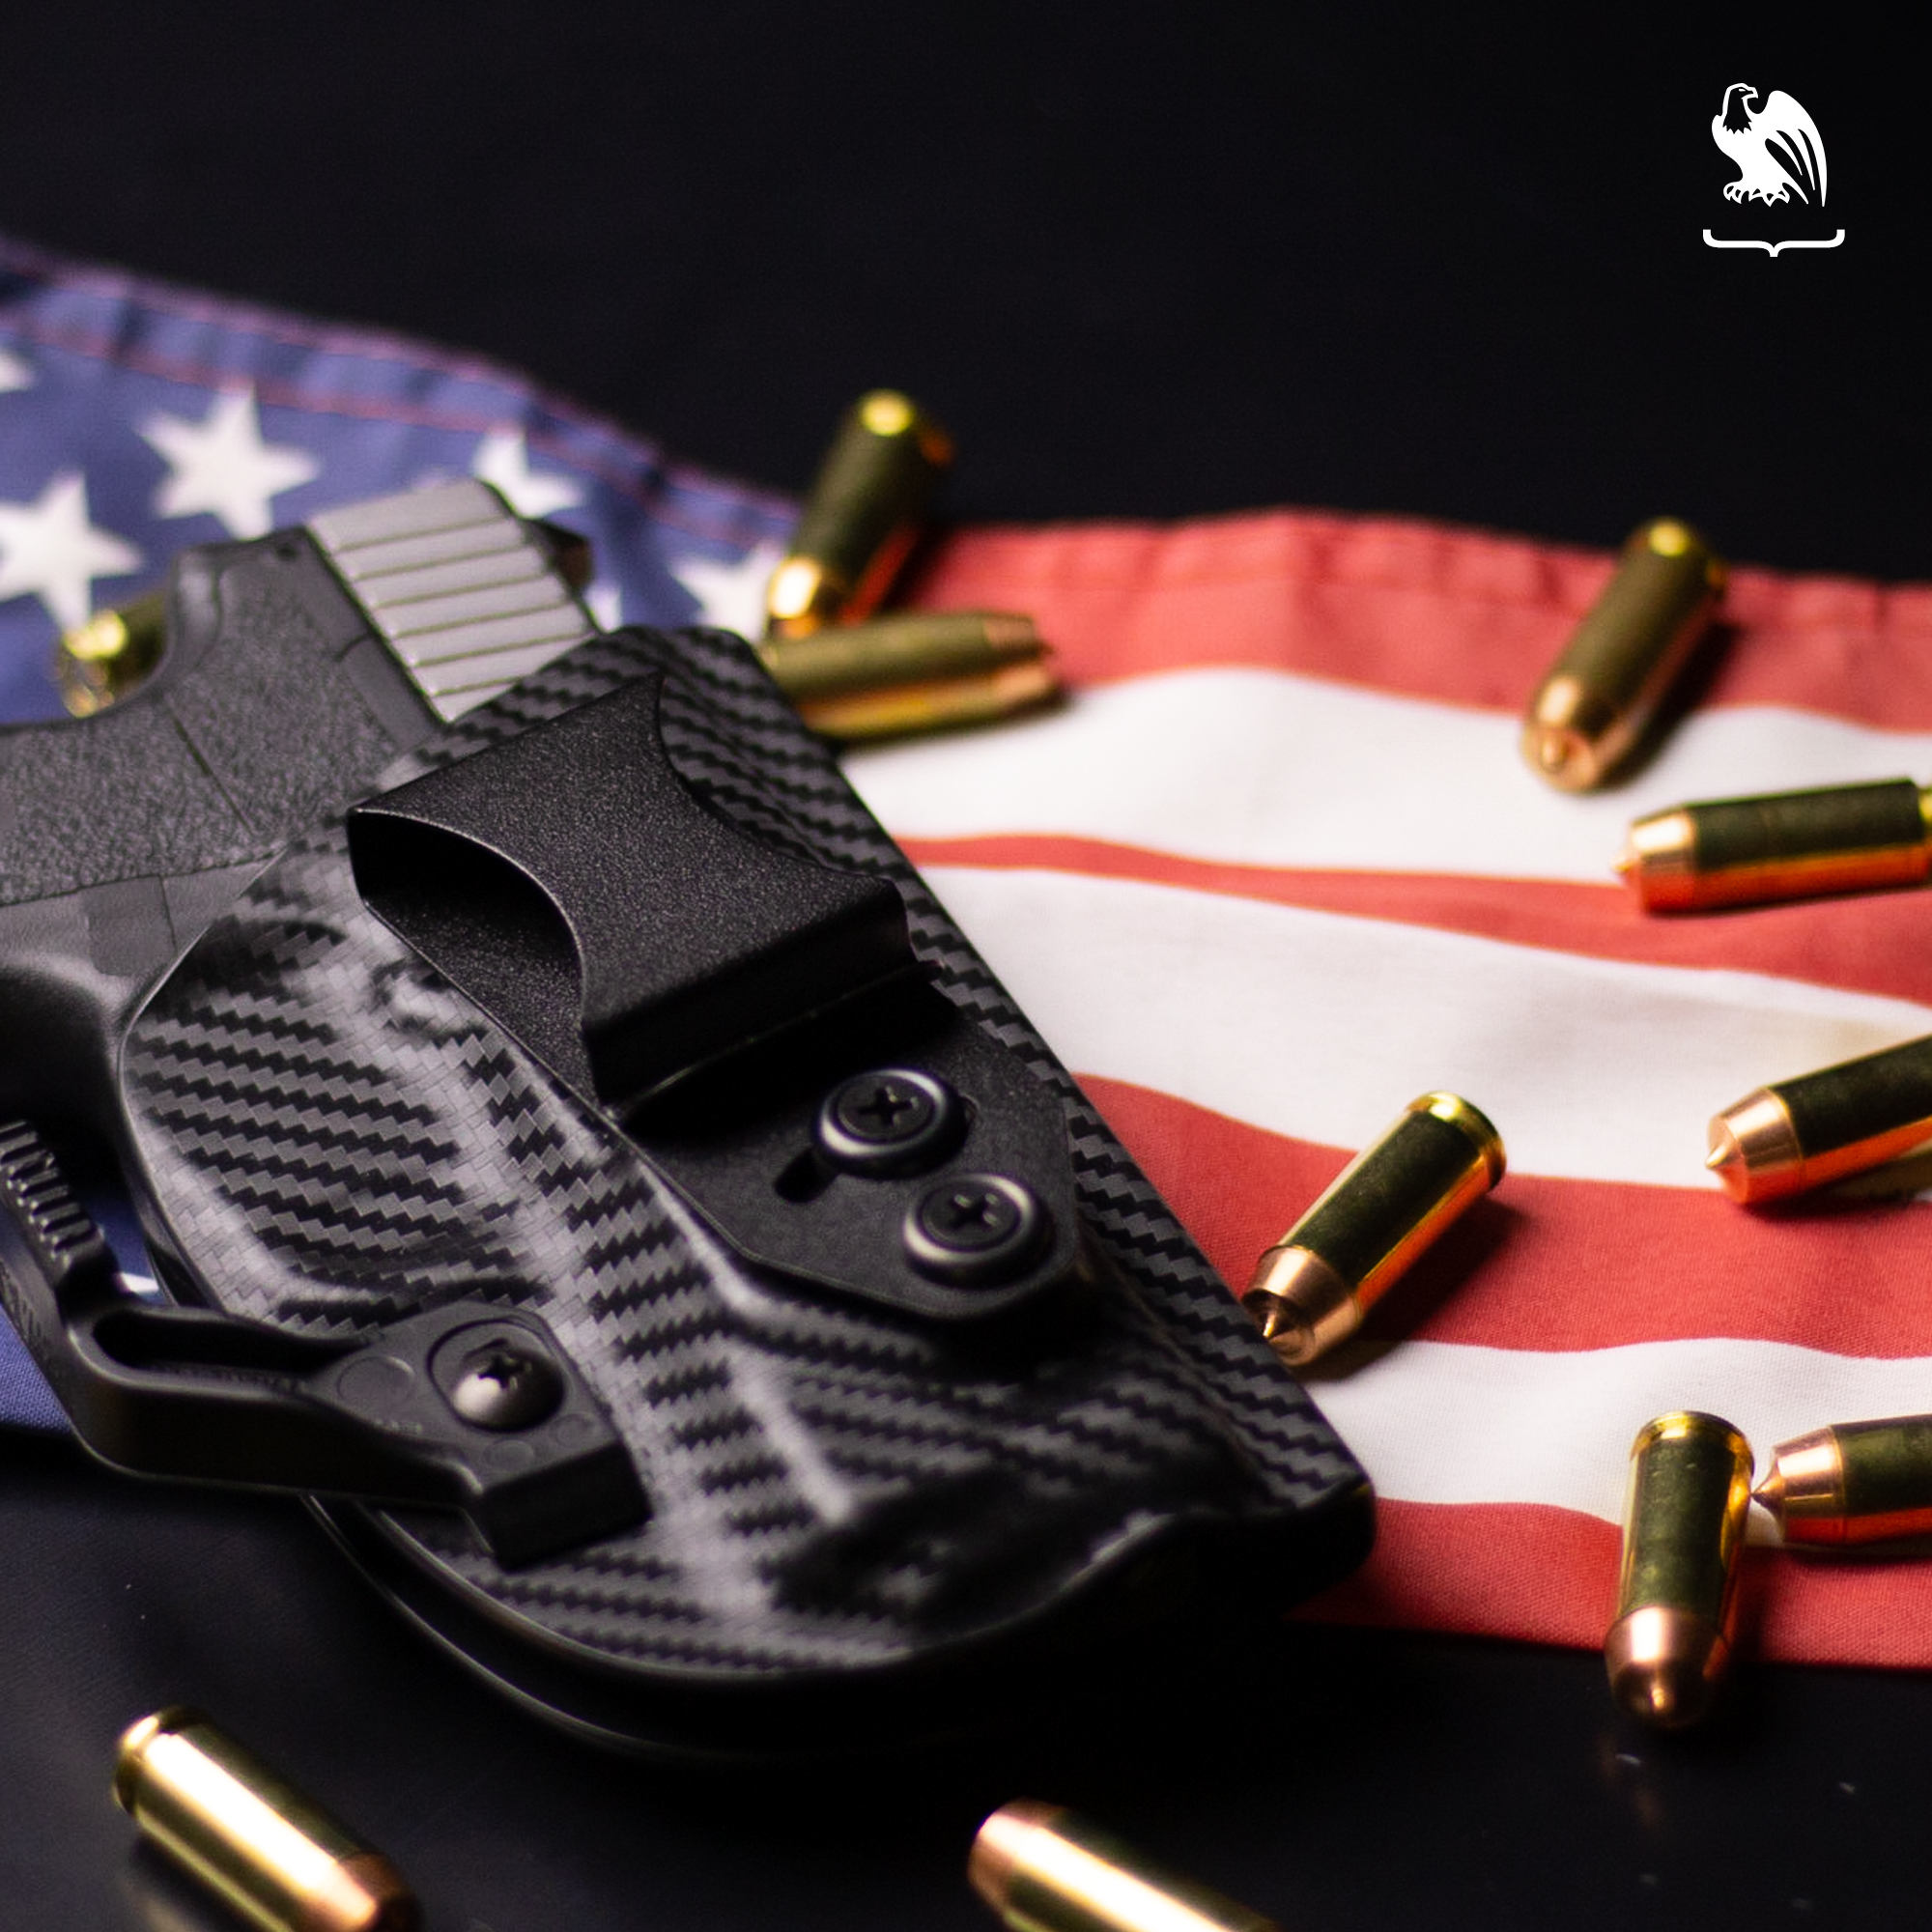 Bullets, holsters and an American flag - Generic Photography